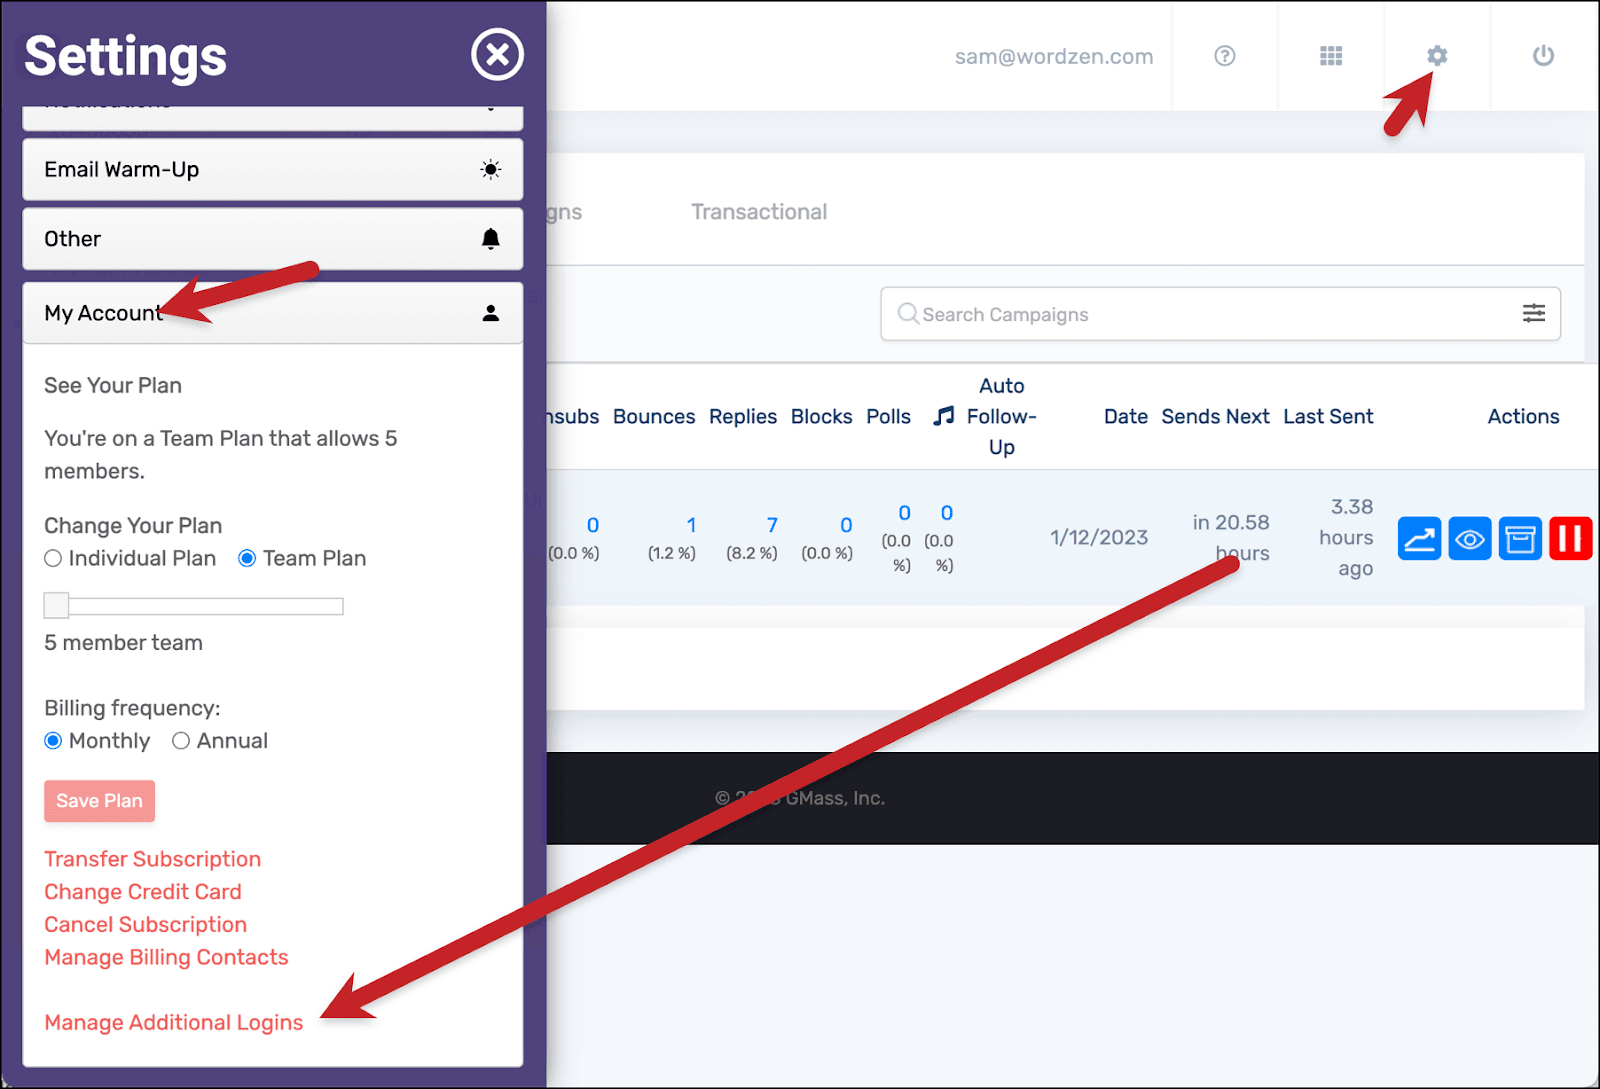 Give dashboard access to a teammate